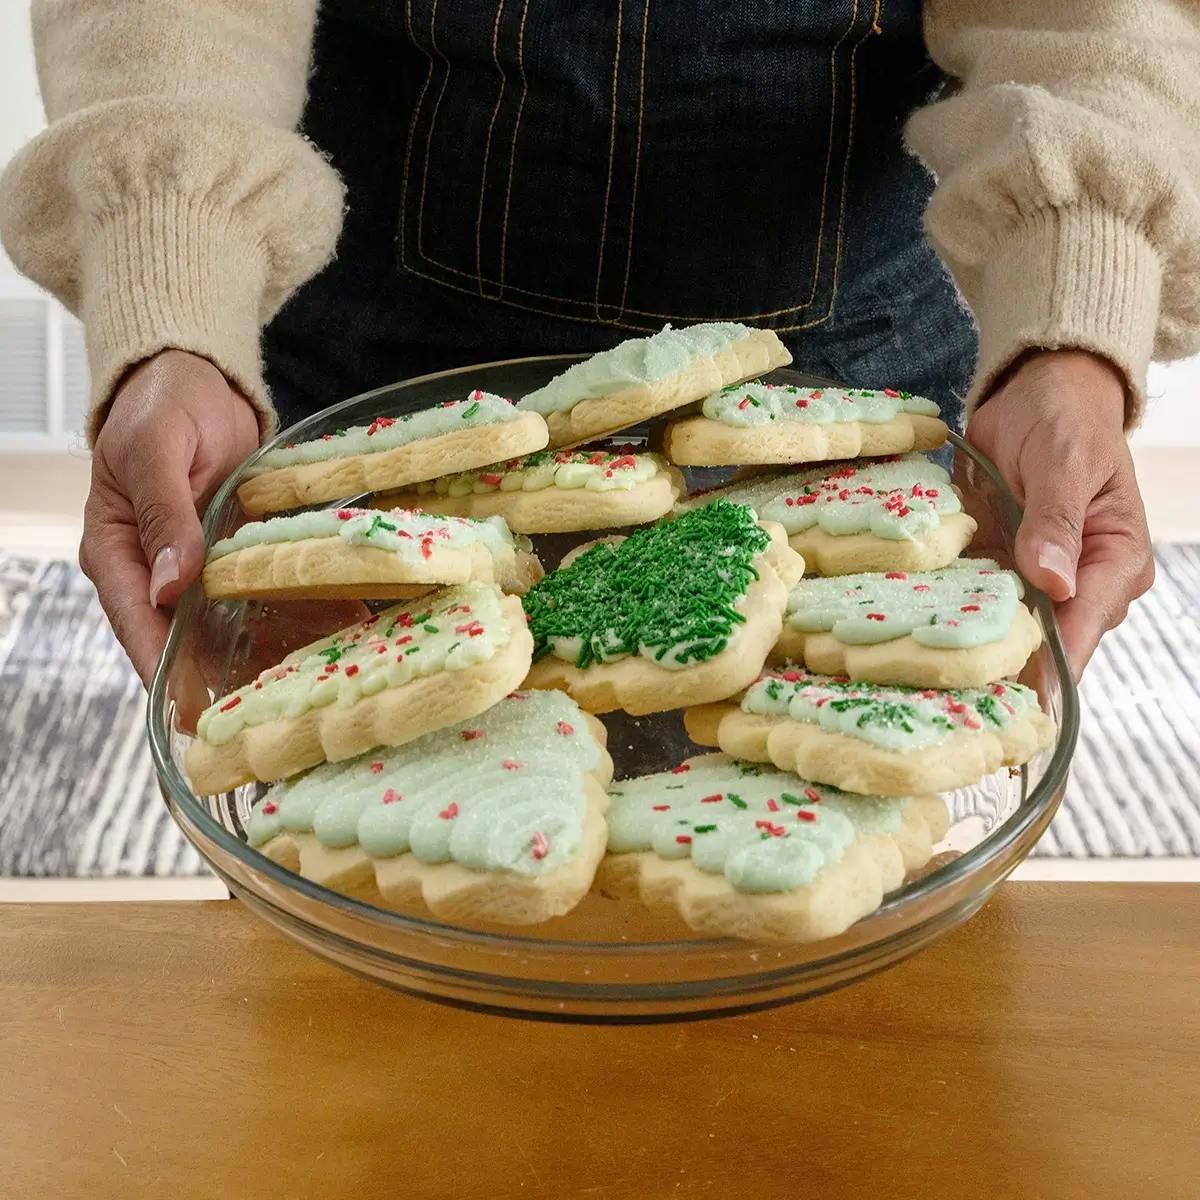 Hands holding a plate of cookies in an article containing Christmas cookie decorating tips.